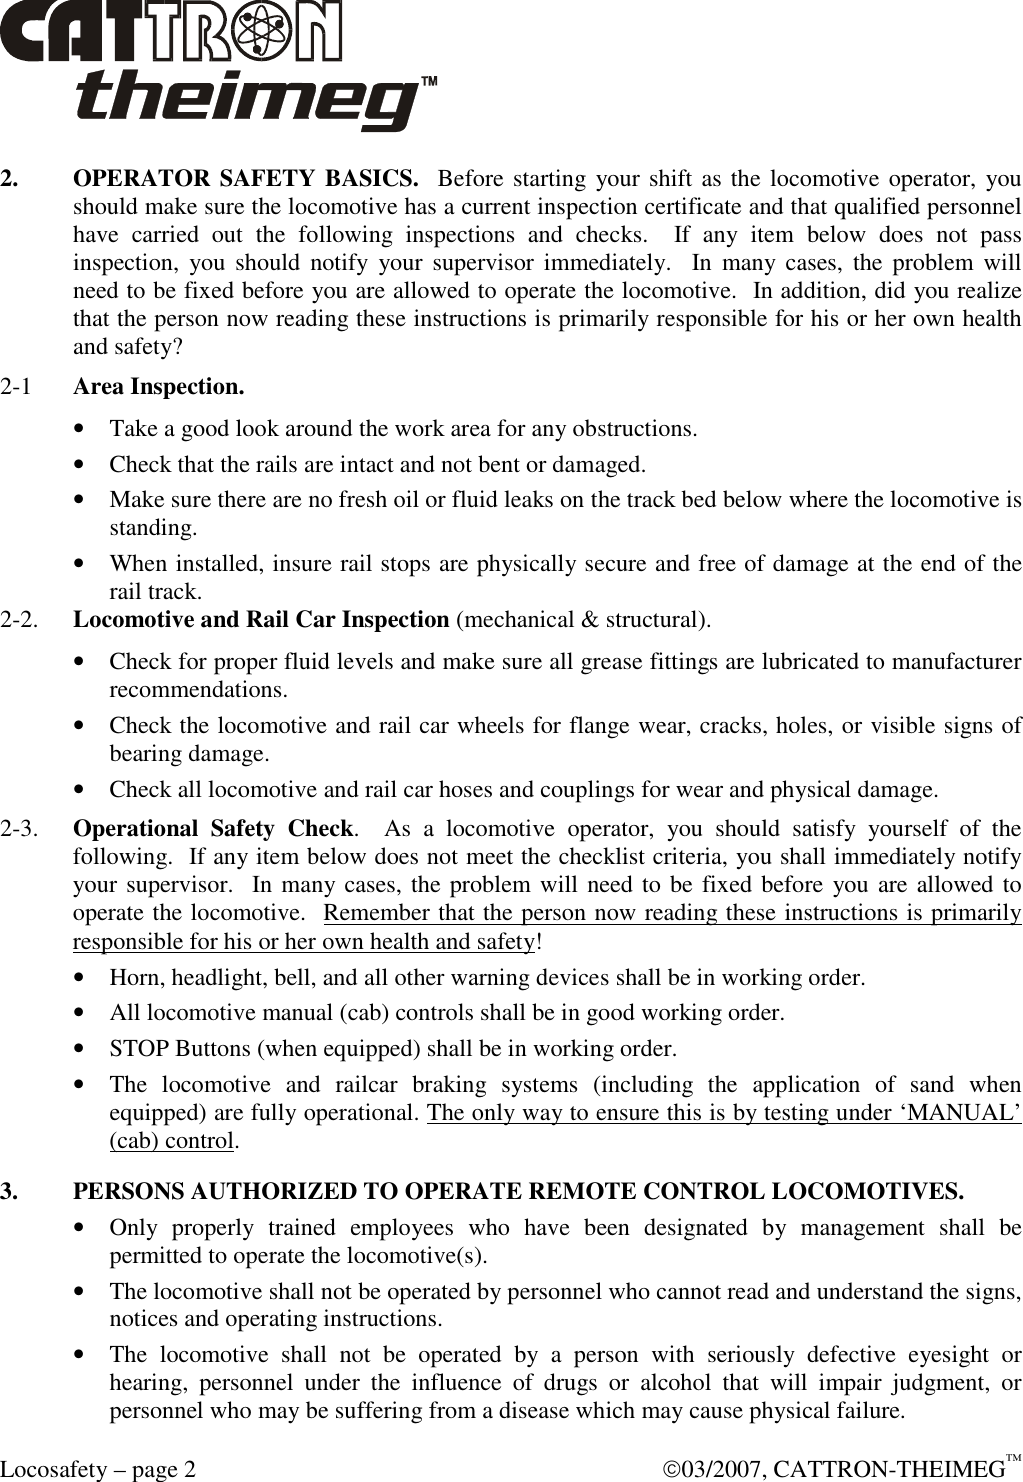  Locosafety – page 2    03/2007, CATTRON-THEIMEG™ 2.  OPERATOR SAFETY BASICS.  Before starting your shift as the locomotive operator,  you should make sure the locomotive has a current inspection certificate and that qualified personnel have  carried  out  the  following  inspections  and  checks.    If  any  item  below  does  not  pass inspection,  you should  notify  your supervisor immediately.   In  many  cases,  the problem will need to be fixed before you are allowed to operate the locomotive.  In addition, did you realize that the person now reading these instructions is primarily responsible for his or her own health and safety? 2-1  Area Inspection.  • Take a good look around the work area for any obstructions. • Check that the rails are intact and not bent or damaged.  • Make sure there are no fresh oil or fluid leaks on the track bed below where the locomotive is standing. • When installed, insure rail stops are physically secure and free of damage at the end of the rail track.  2-2.  Locomotive and Rail Car Inspection (mechanical &amp; structural). • Check for proper fluid levels and make sure all grease fittings are lubricated to manufacturer recommendations.  • Check the locomotive and rail car wheels for flange wear, cracks, holes, or visible signs of bearing damage. • Check all locomotive and rail car hoses and couplings for wear and physical damage.  2-3.  Operational  Safety  Check.    As  a  locomotive  operator,  you  should  satisfy  yourself  of  the following.  If any item below does not meet the checklist criteria, you shall immediately notify your supervisor.  In many cases, the problem will need to be fixed before you are allowed to operate the locomotive.  Remember that the person now reading these instructions is primarily responsible for his or her own health and safety! • Horn, headlight, bell, and all other warning devices shall be in working order. • All locomotive manual (cab) controls shall be in good working order. • STOP Buttons (when equipped) shall be in working order.  • The  locomotive  and  railcar  braking  systems  (including  the  application  of  sand  when equipped) are fully operational. The only way to ensure this is by testing under ‘MANUAL’ (cab) control.  3. PERSONS AUTHORIZED TO OPERATE REMOTE CONTROL LOCOMOTIVES. • Only  properly  trained  employees  who  have  been  designated  by  management  shall  be permitted to operate the locomotive(s). • The locomotive shall not be operated by personnel who cannot read and understand the signs, notices and operating instructions. • The  locomotive  shall  not  be  operated  by  a  person  with  seriously  defective  eyesight  or hearing,  personnel  under  the  influence  of  drugs  or  alcohol  that  will  impair  judgment,  or personnel who may be suffering from a disease which may cause physical failure. 